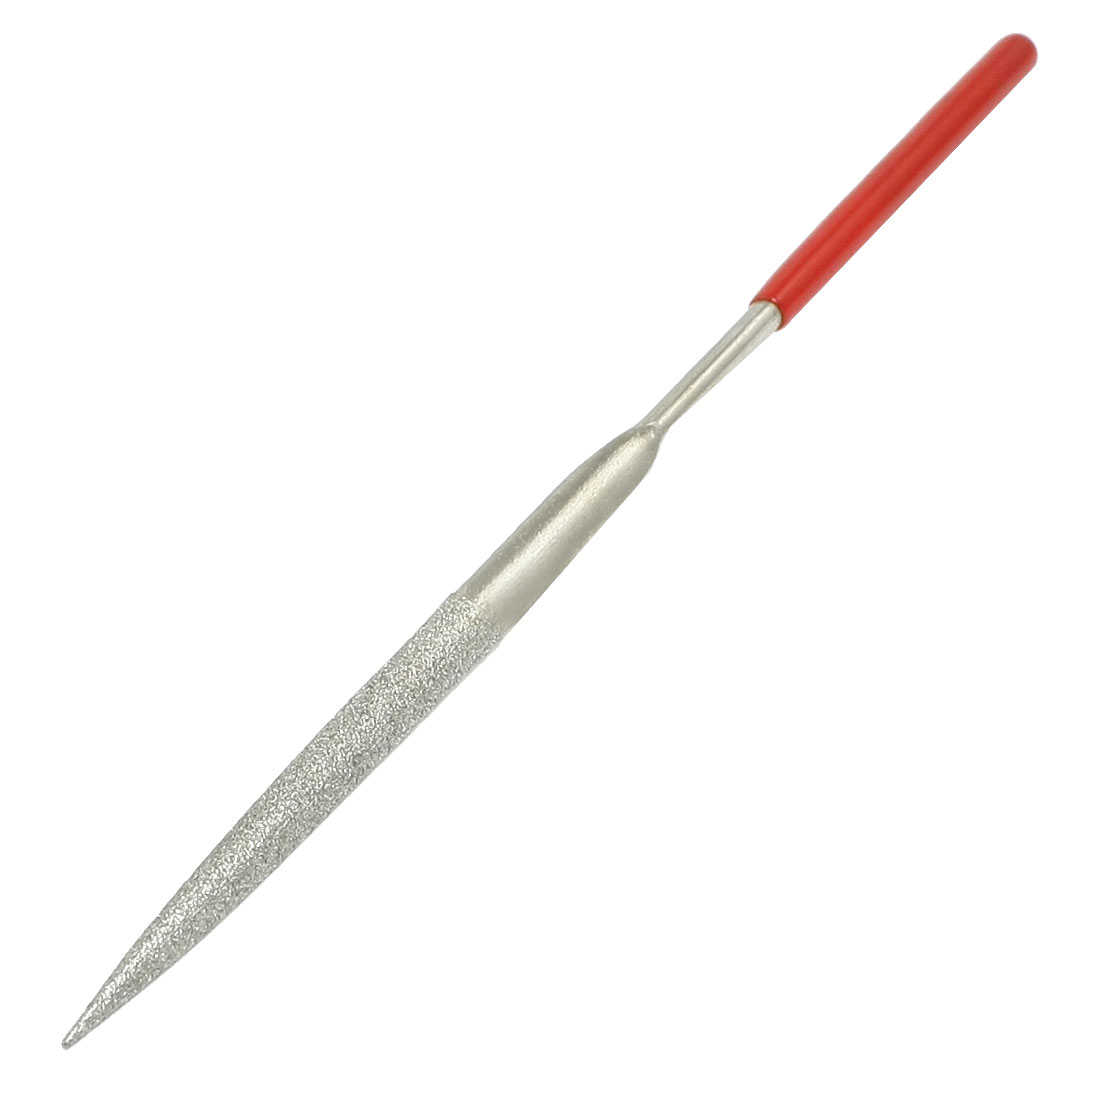 Unique Bargains 50mm Frosting Length Replacing Tool Metal Half Round Files Red Silver Tone